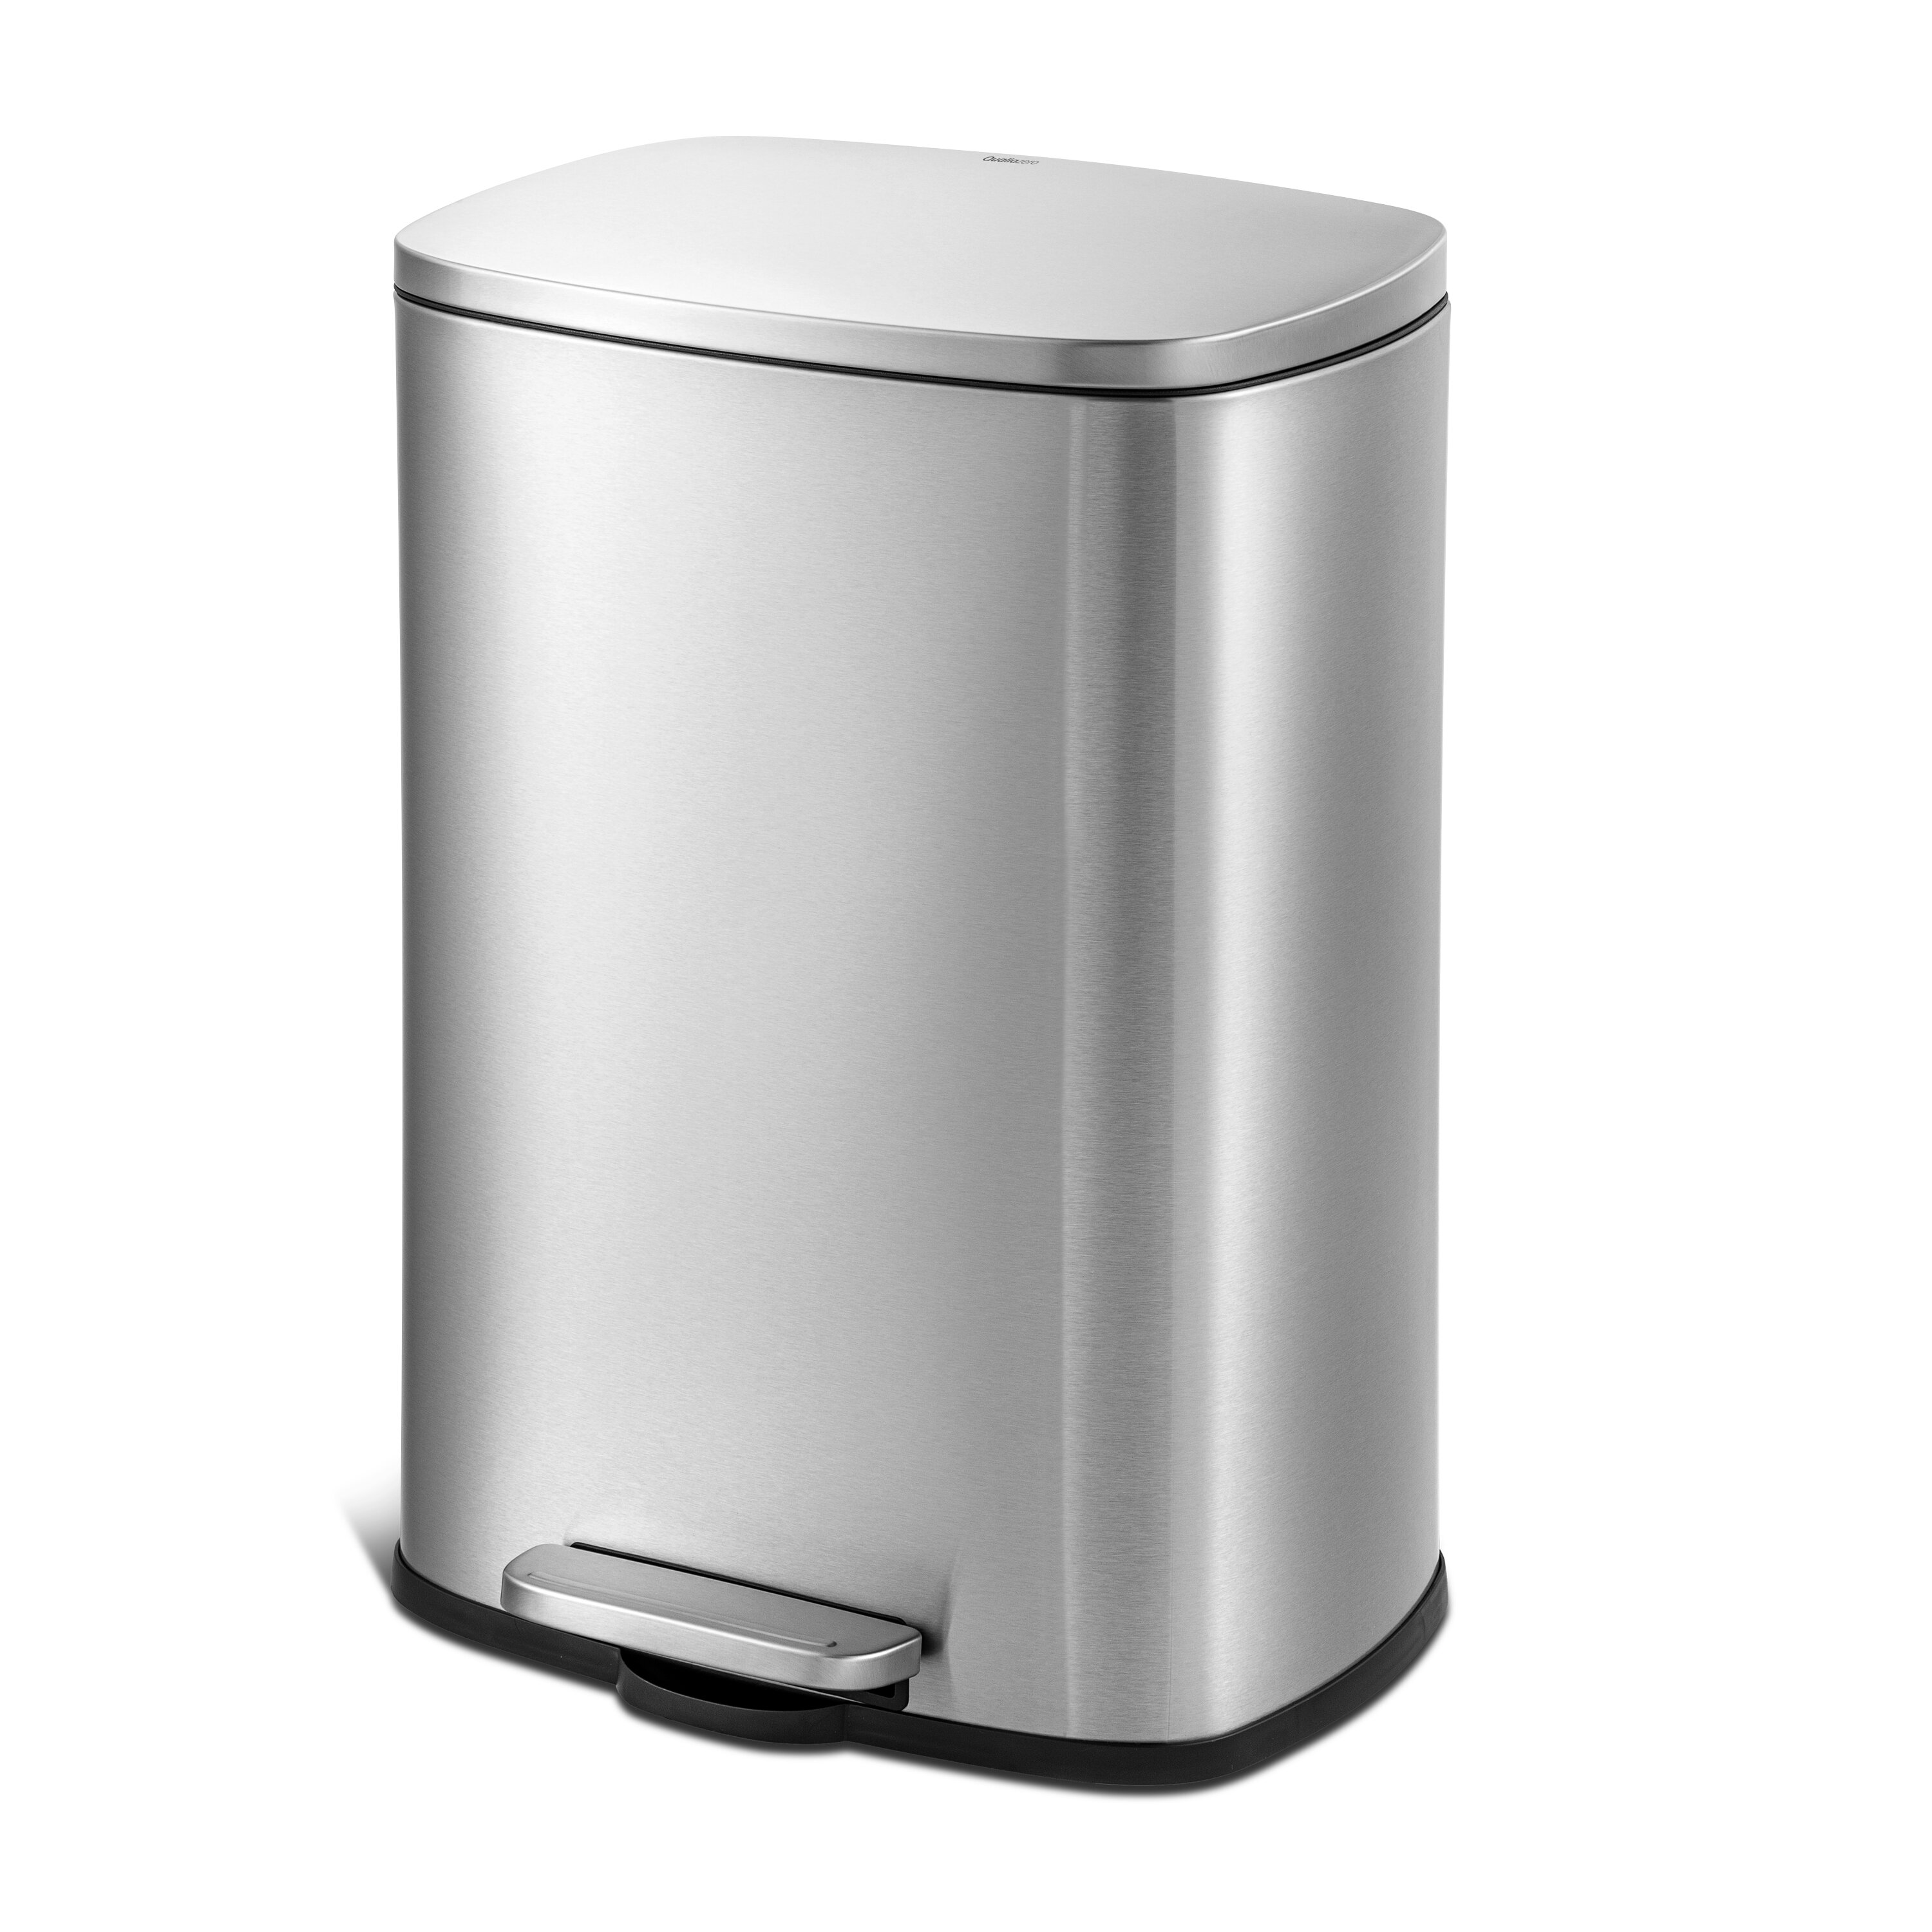 CURVER Organic Daily Waste Container 26 x 23 x 25 cm 